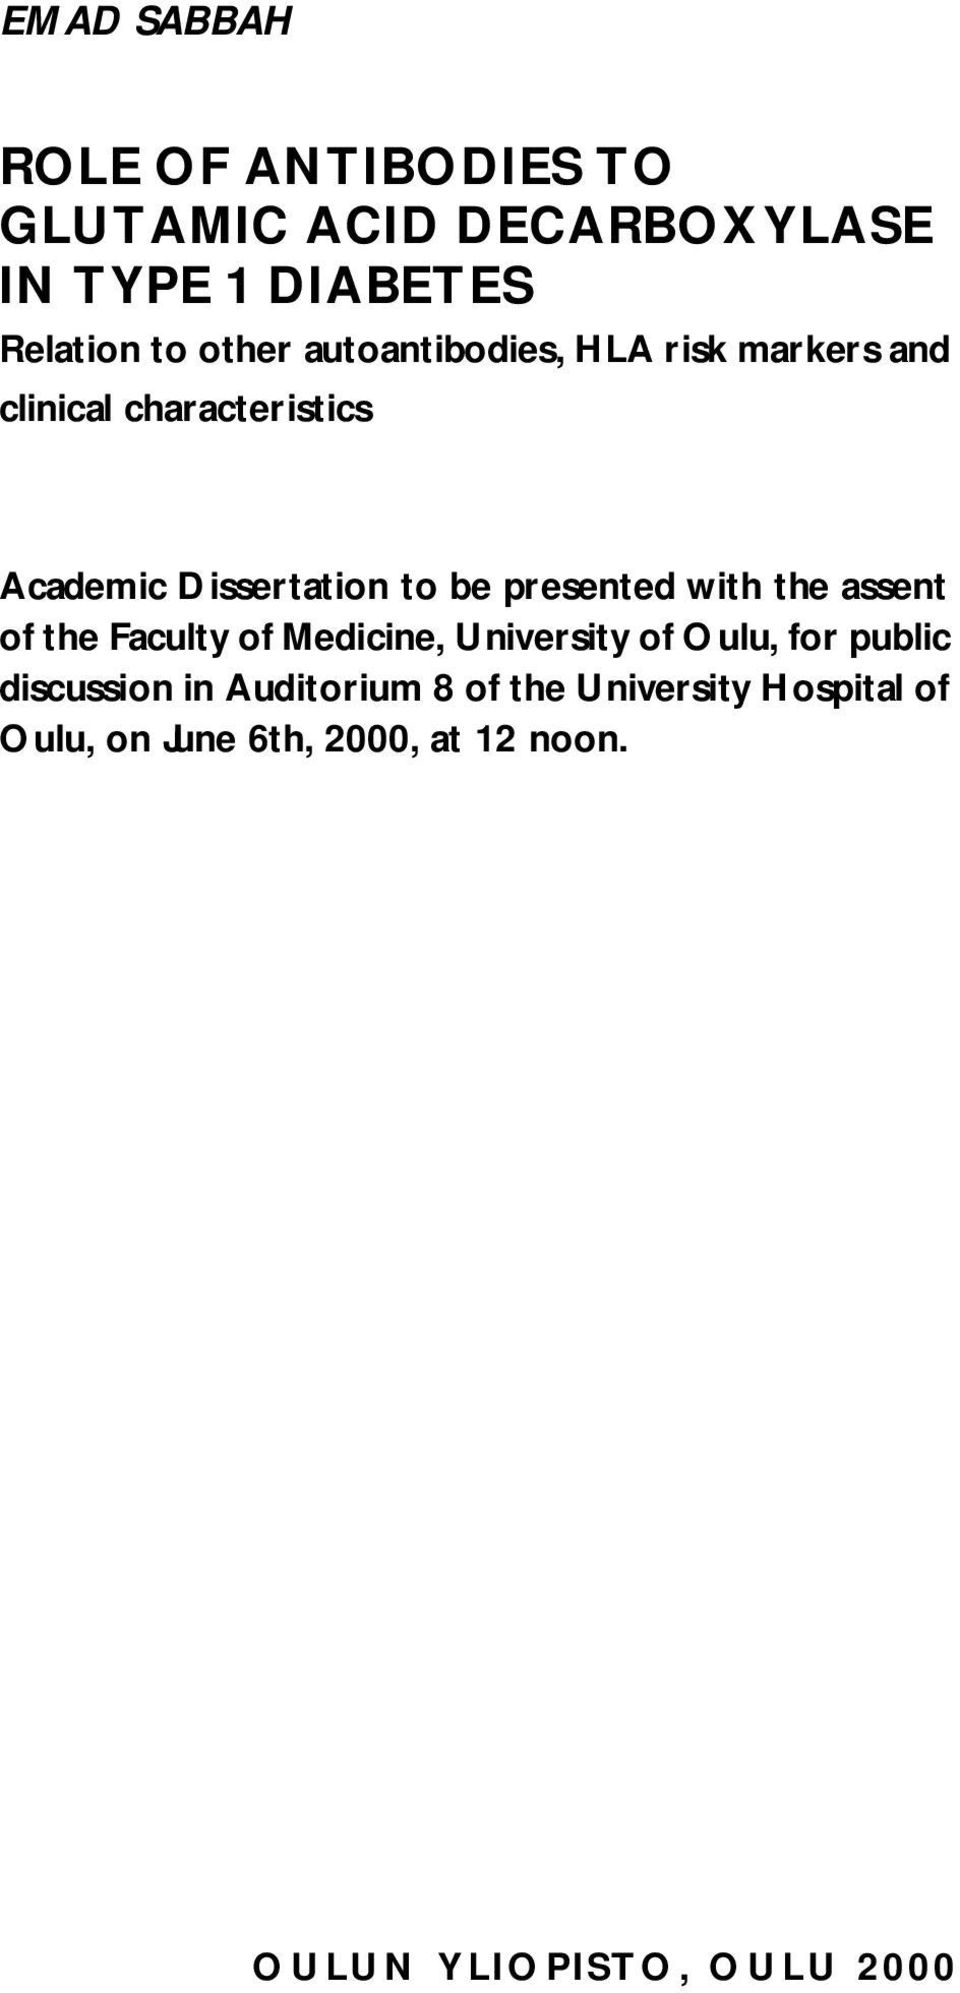 presented with the assent of the Faculty of Medicine, University of Oulu, for public discussion in